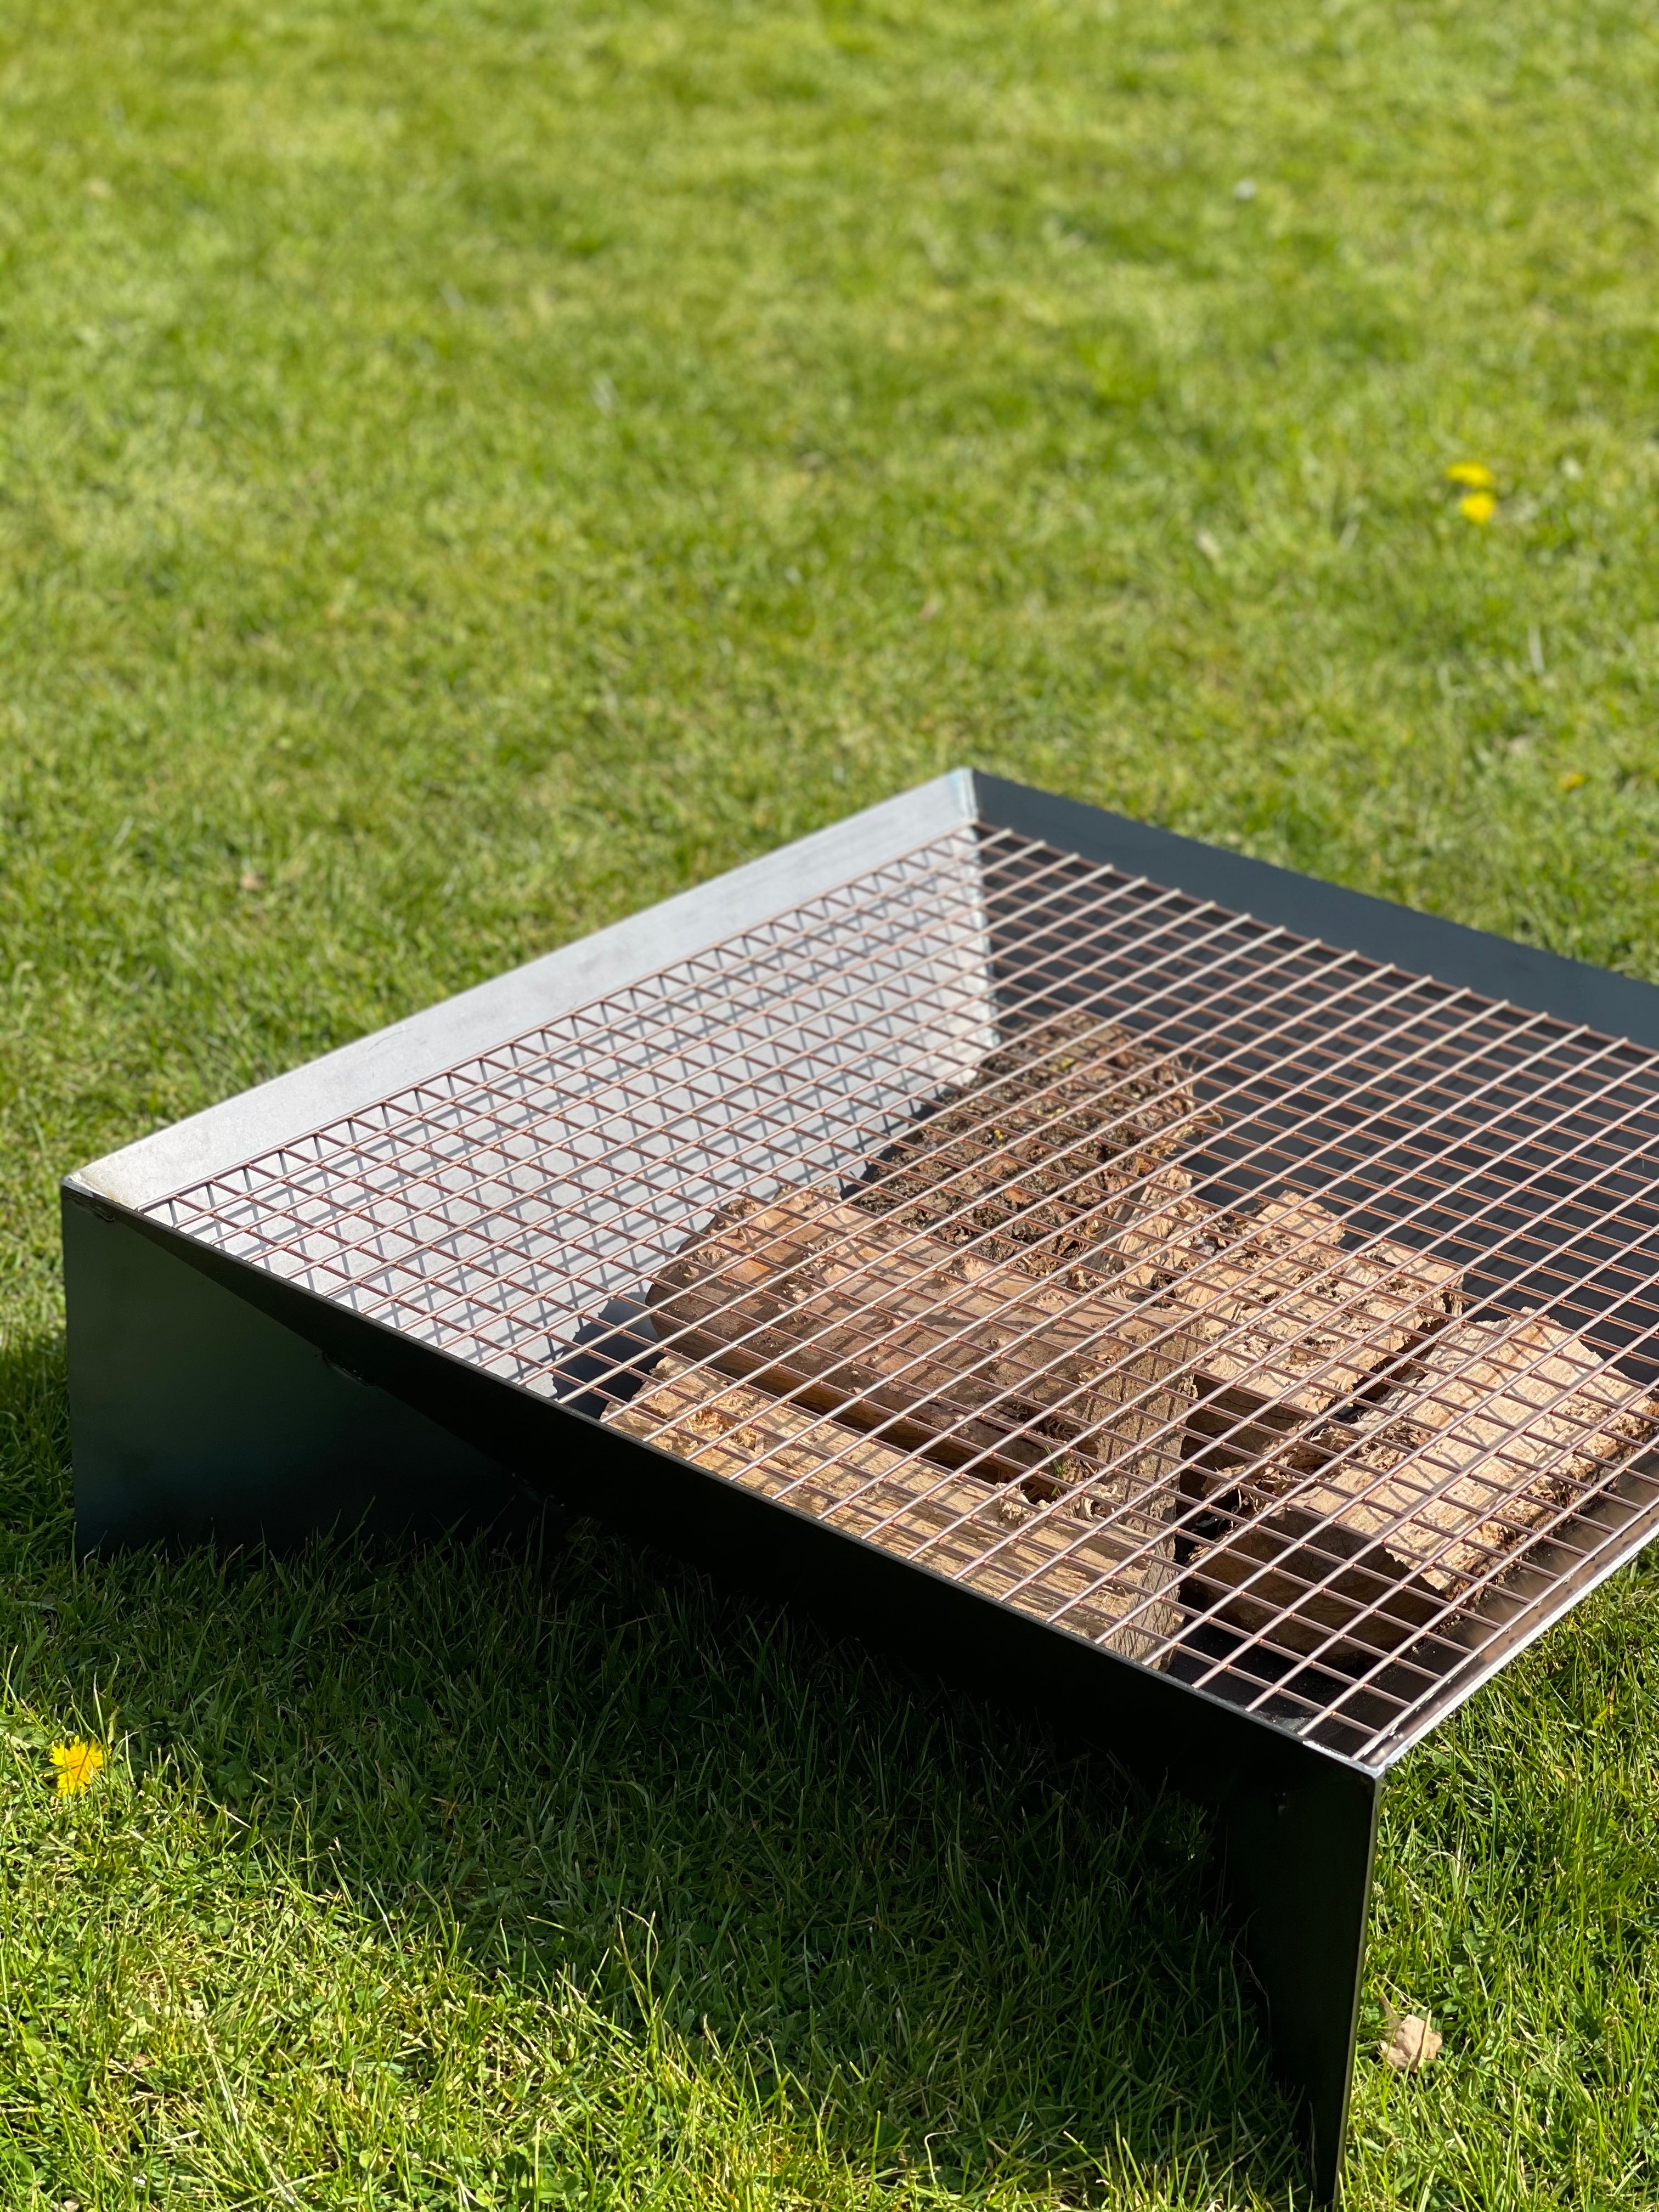 Oxford Handmade Fire pit with Grill Mesh for Garden